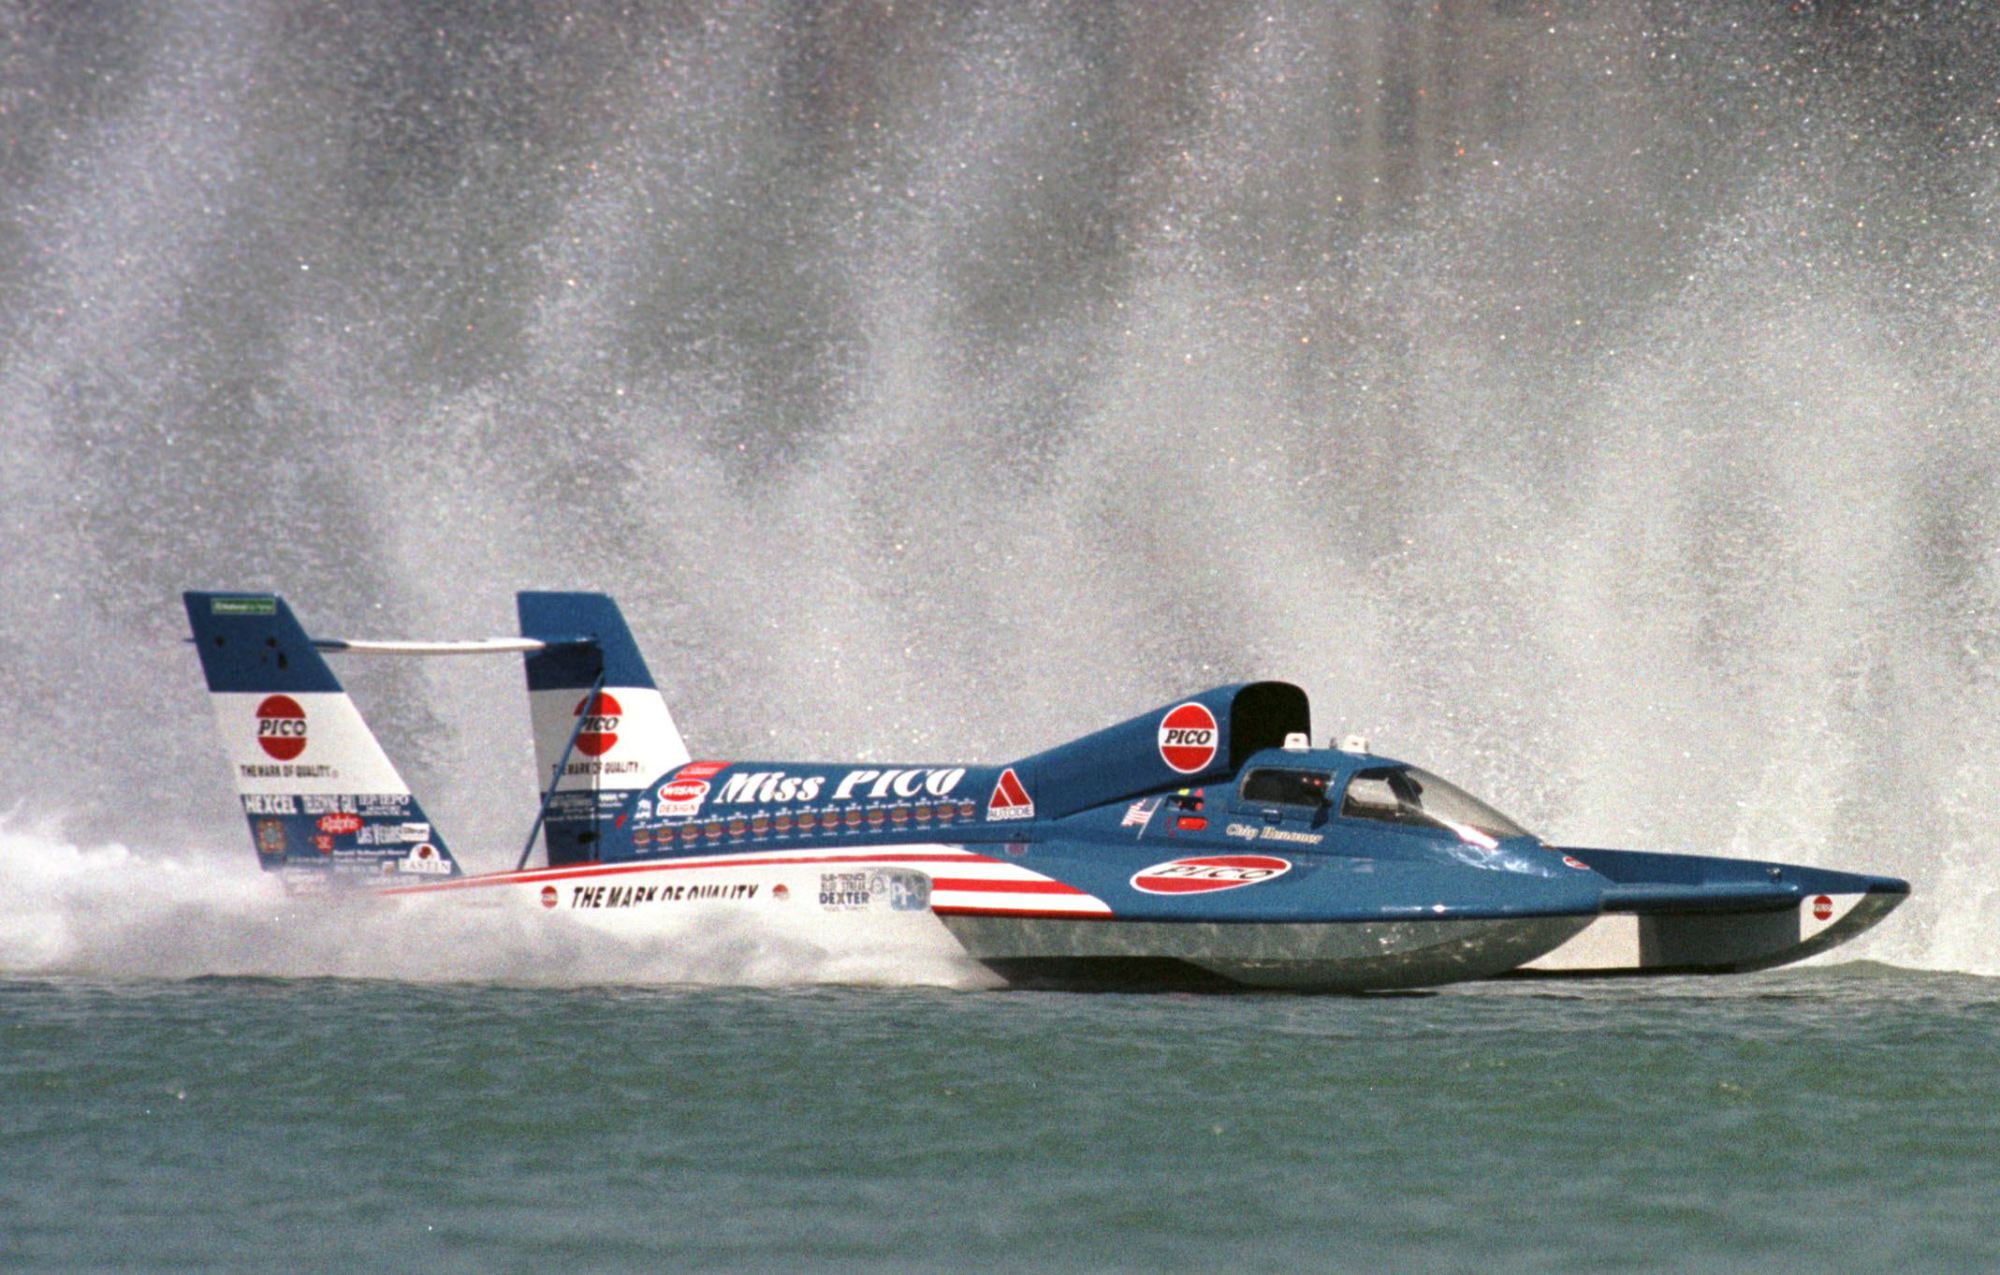 boat, hot, hydroplane, jet, race, racing, rod, rods, ship, unlimited hydroplane